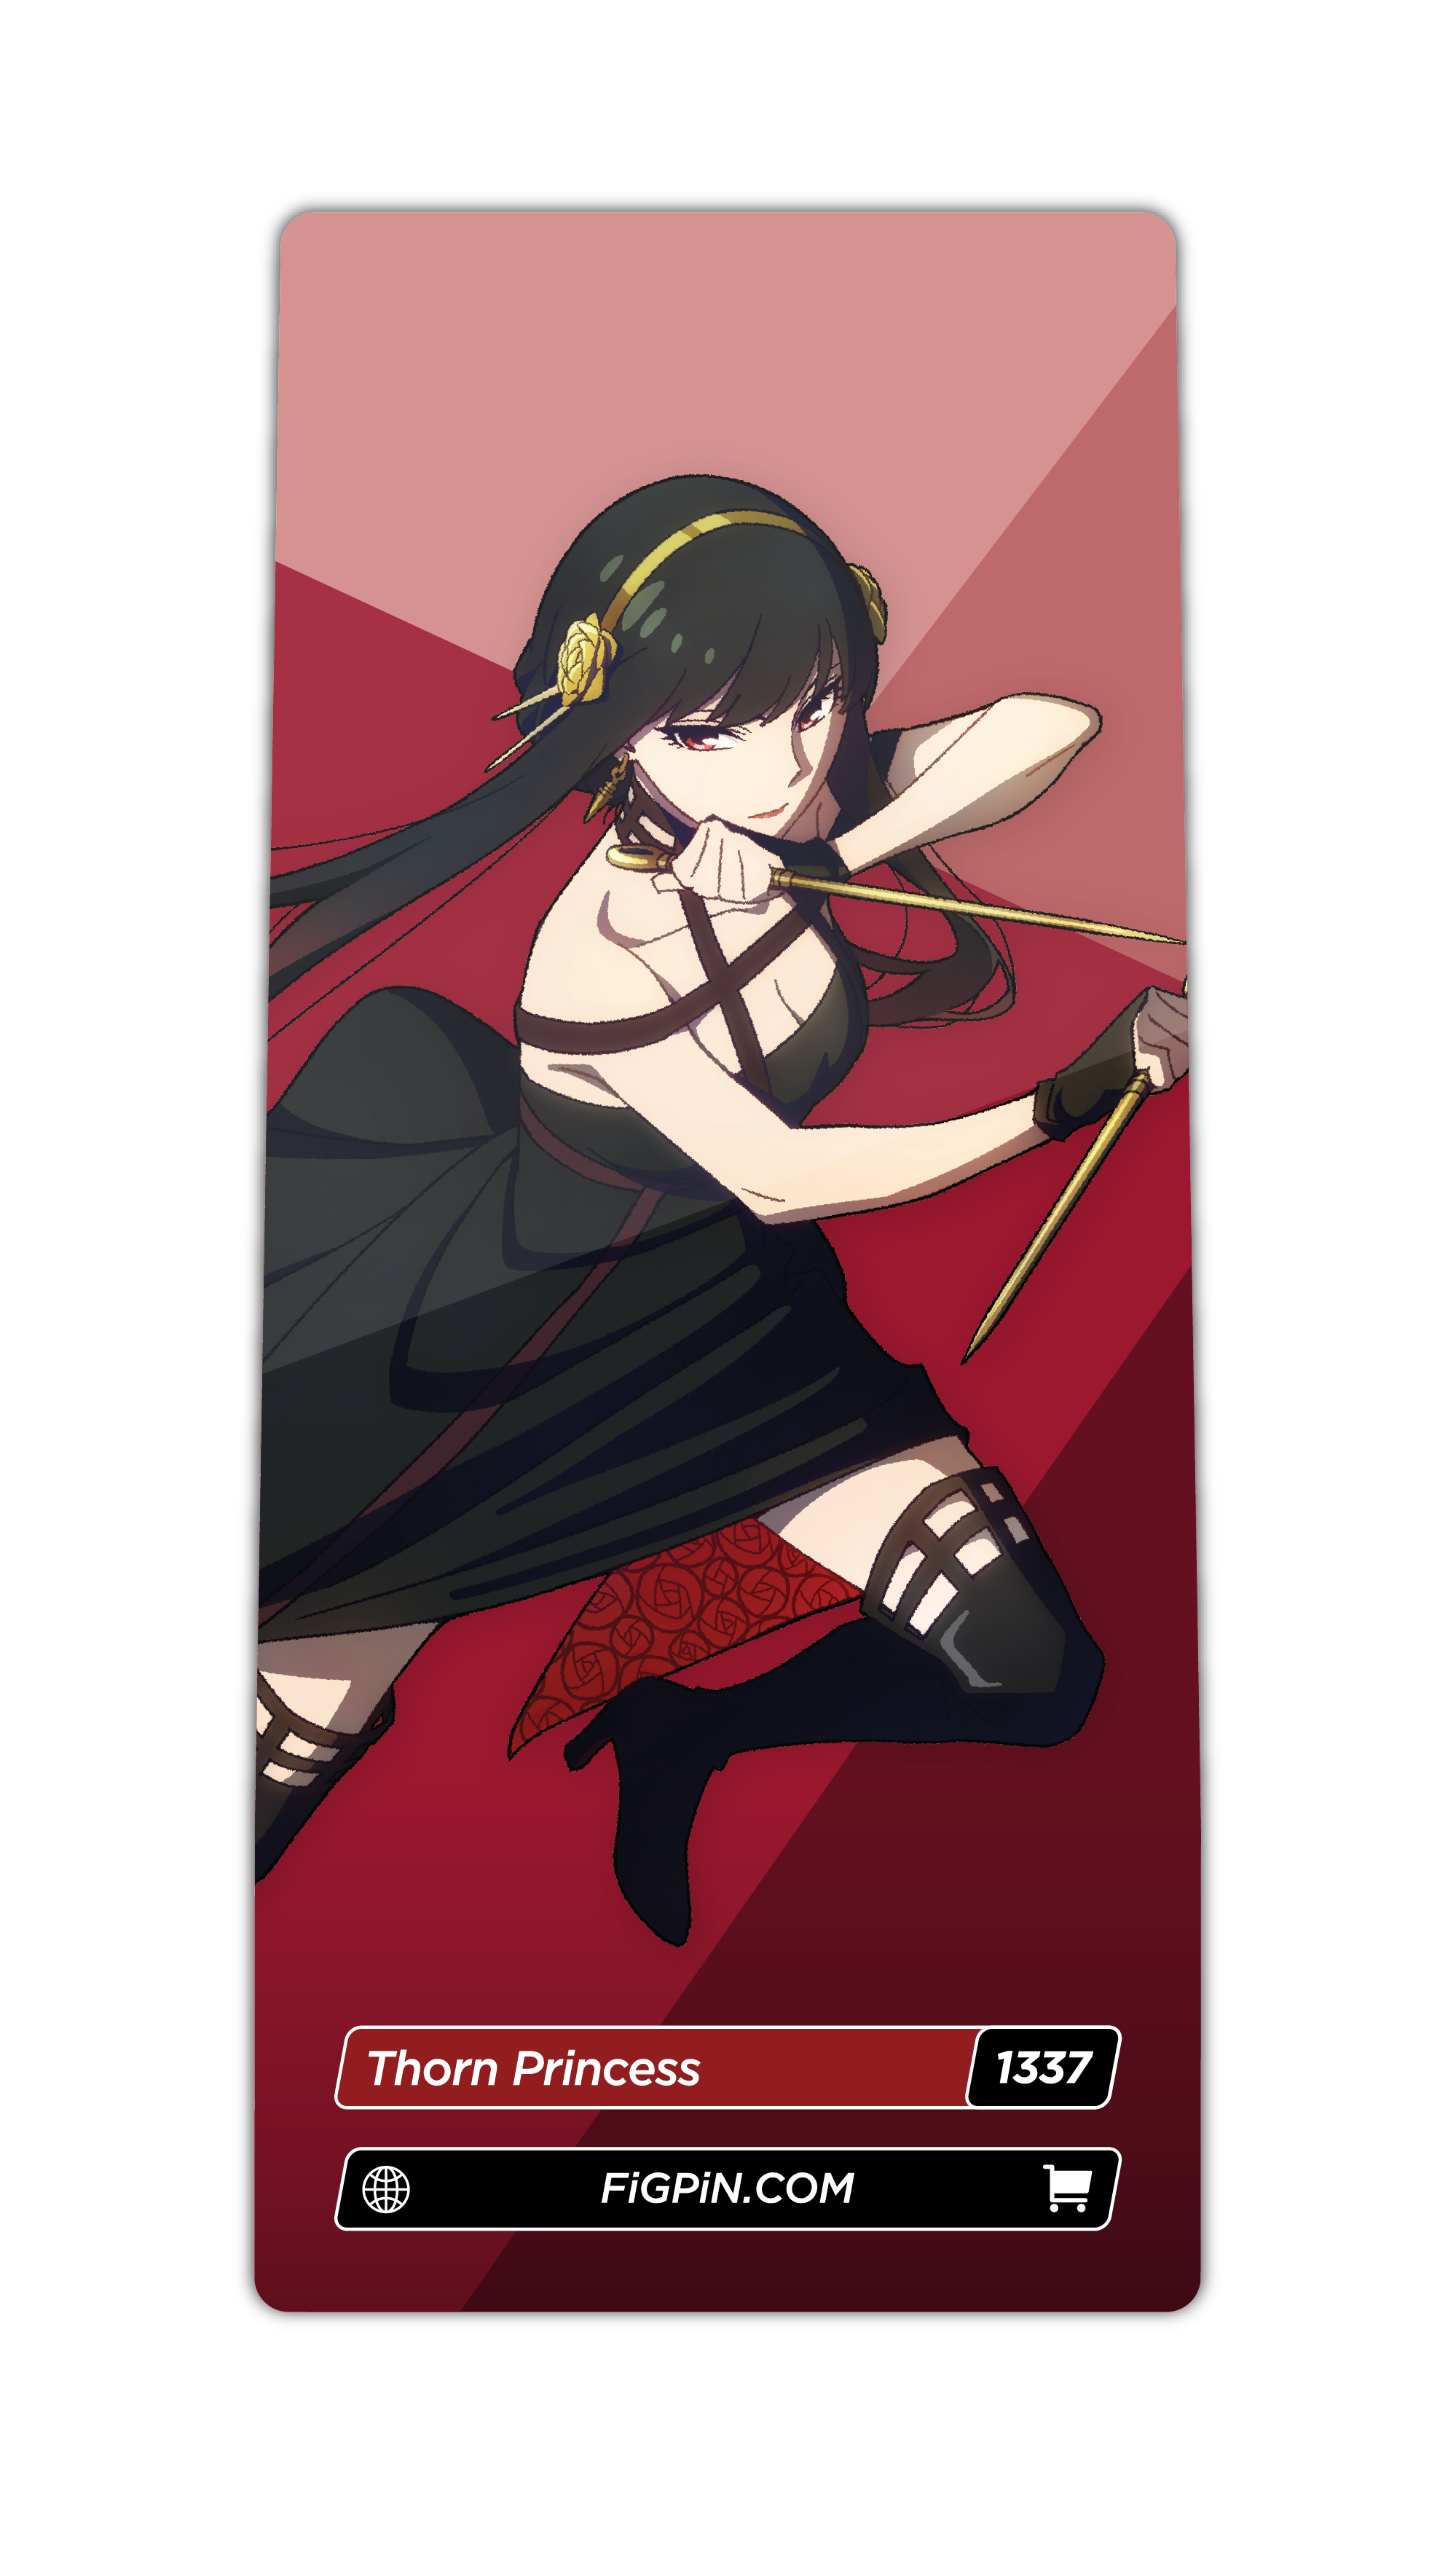 Character card of Spy x Family's Thorn Princess with text “Thorn Princess (1337)” and link to FiGPiN’s website